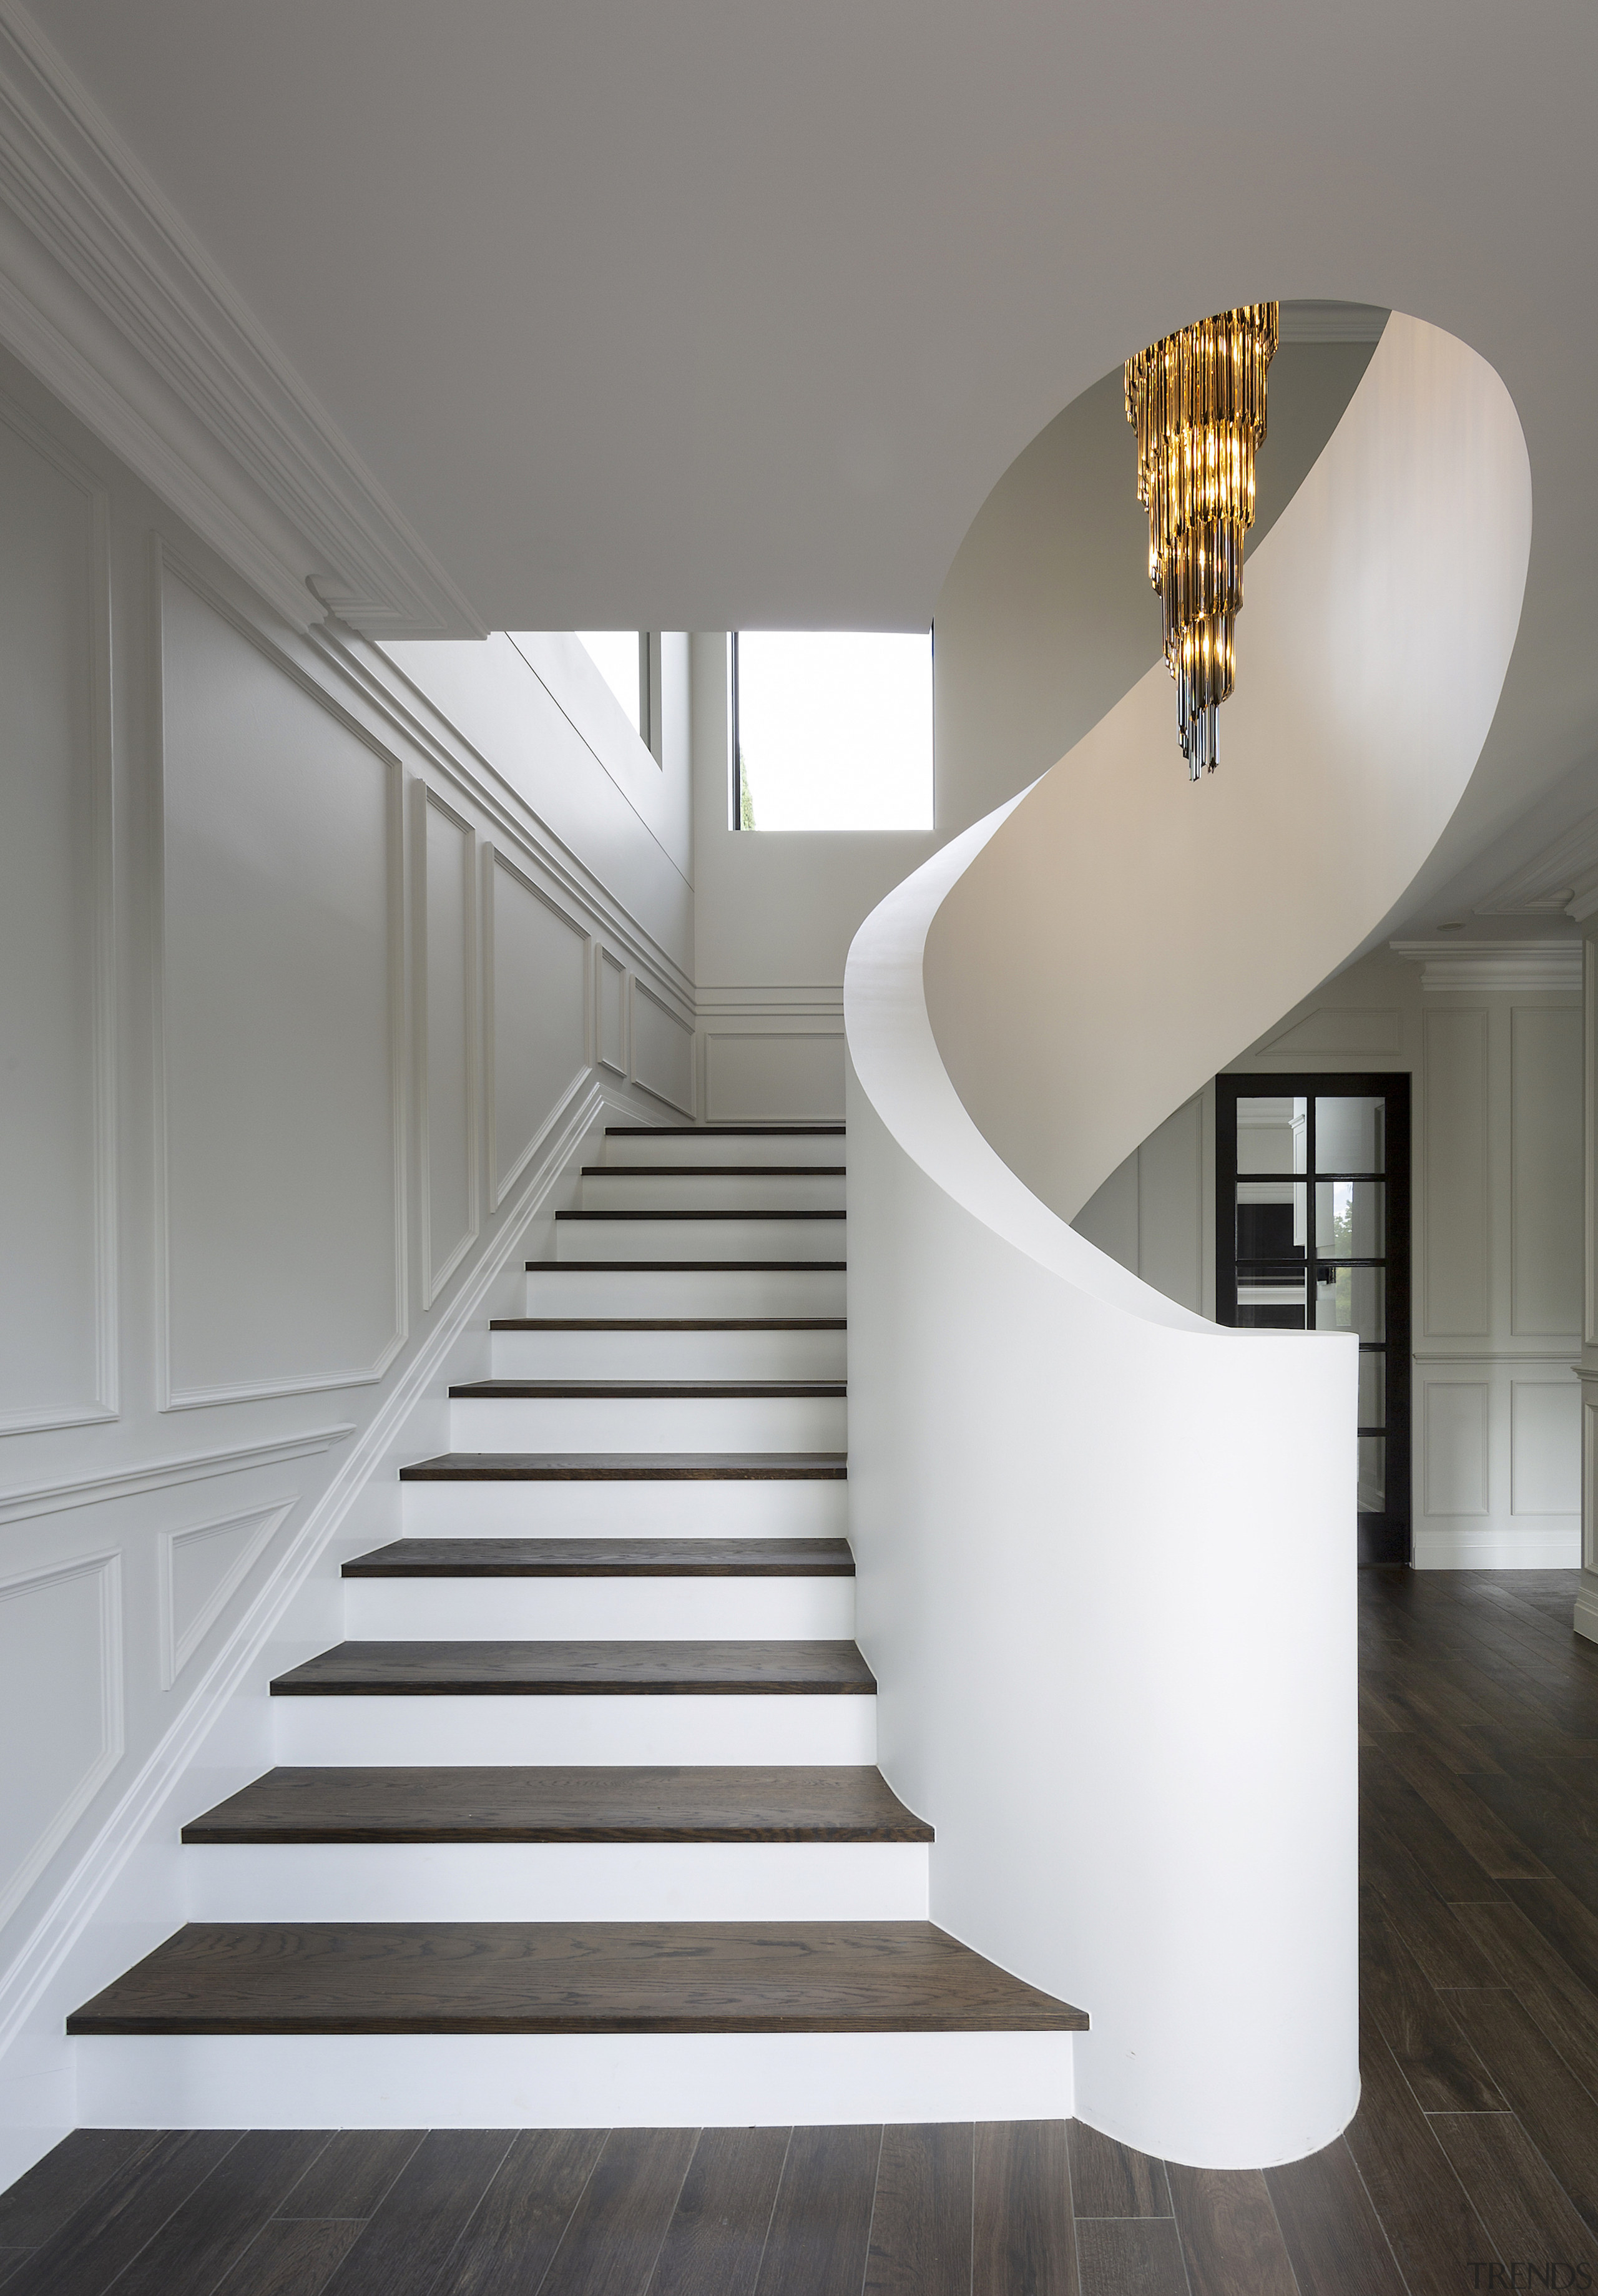 The feature central staircase – classic to the 